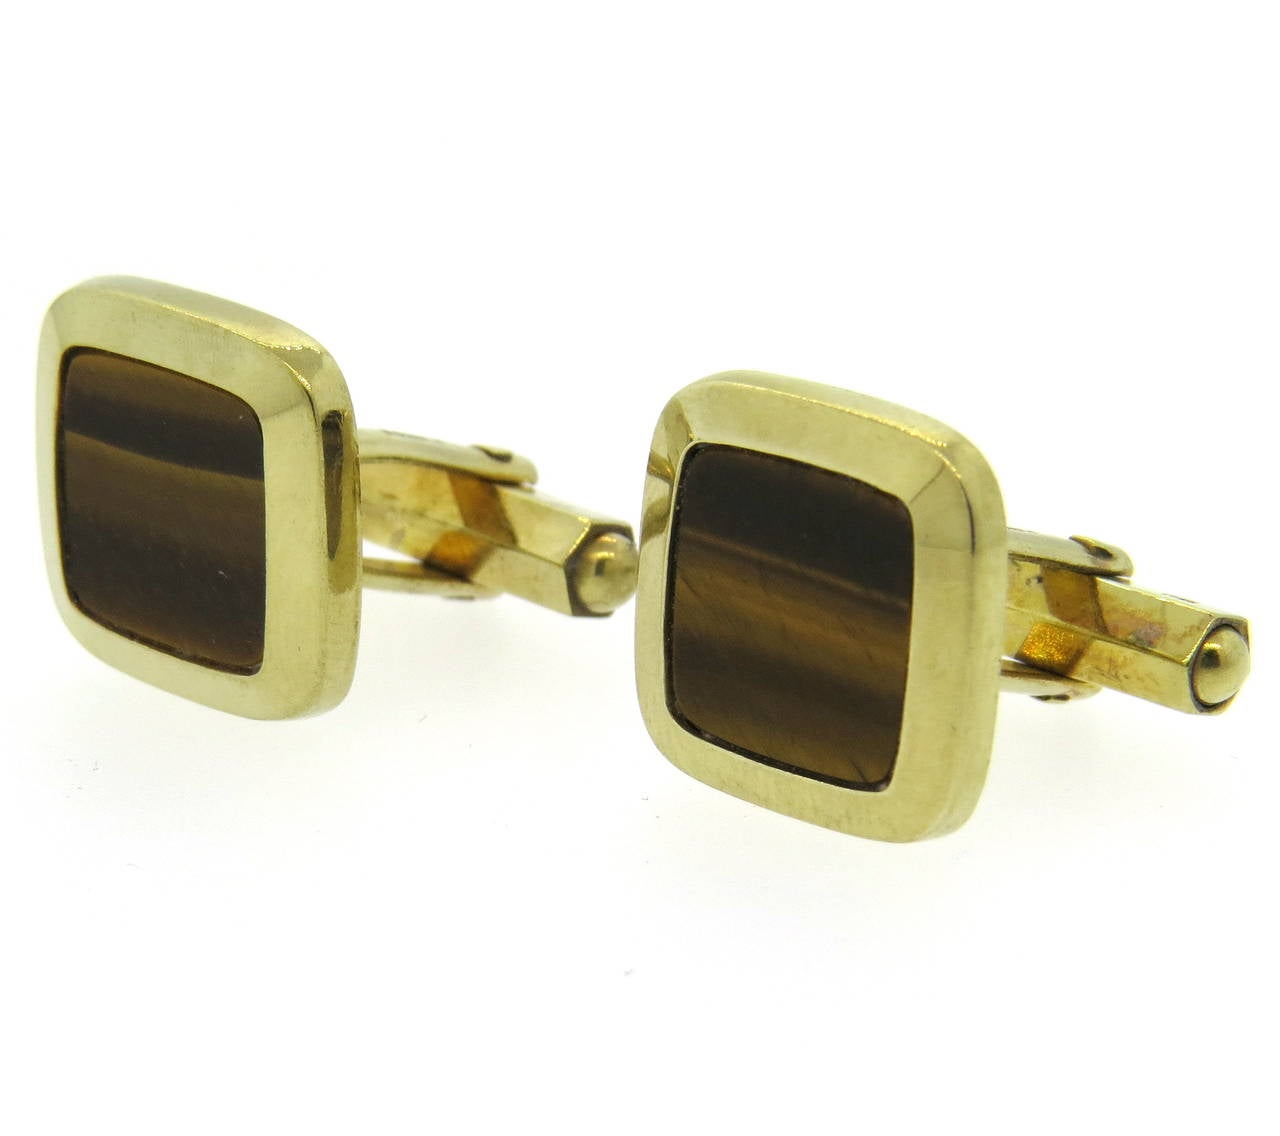 A pair of 9k yellow gold cufflinks, set with tiger's eye.  Crafted in England, the cufflinks measure 16mm x 16mm and weigh 9.2 grams.  Marked with English hallmarks and 375.